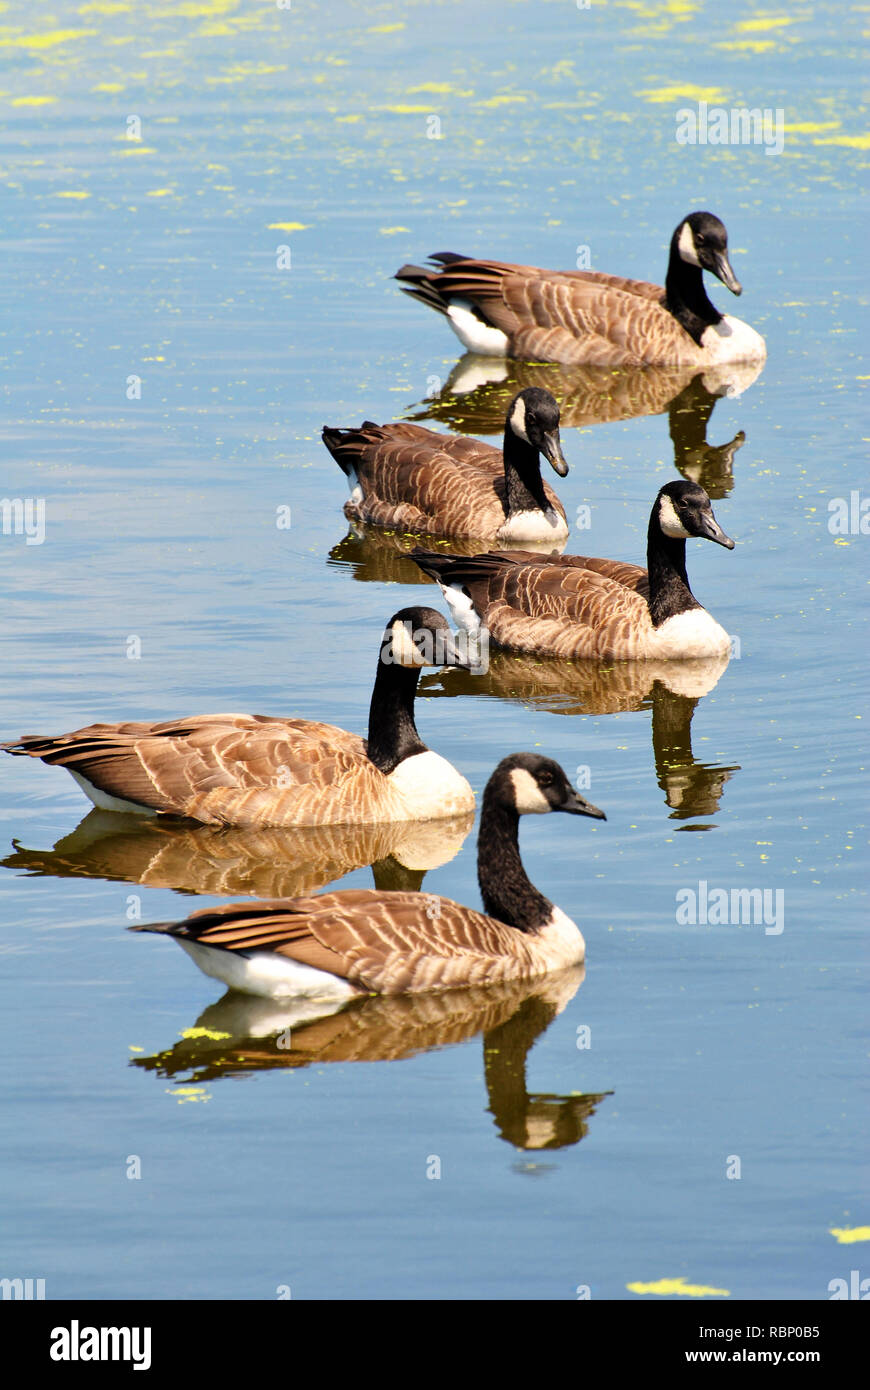 Canadian Geese Swimming in a Pond on a Summer Day Stock Photo